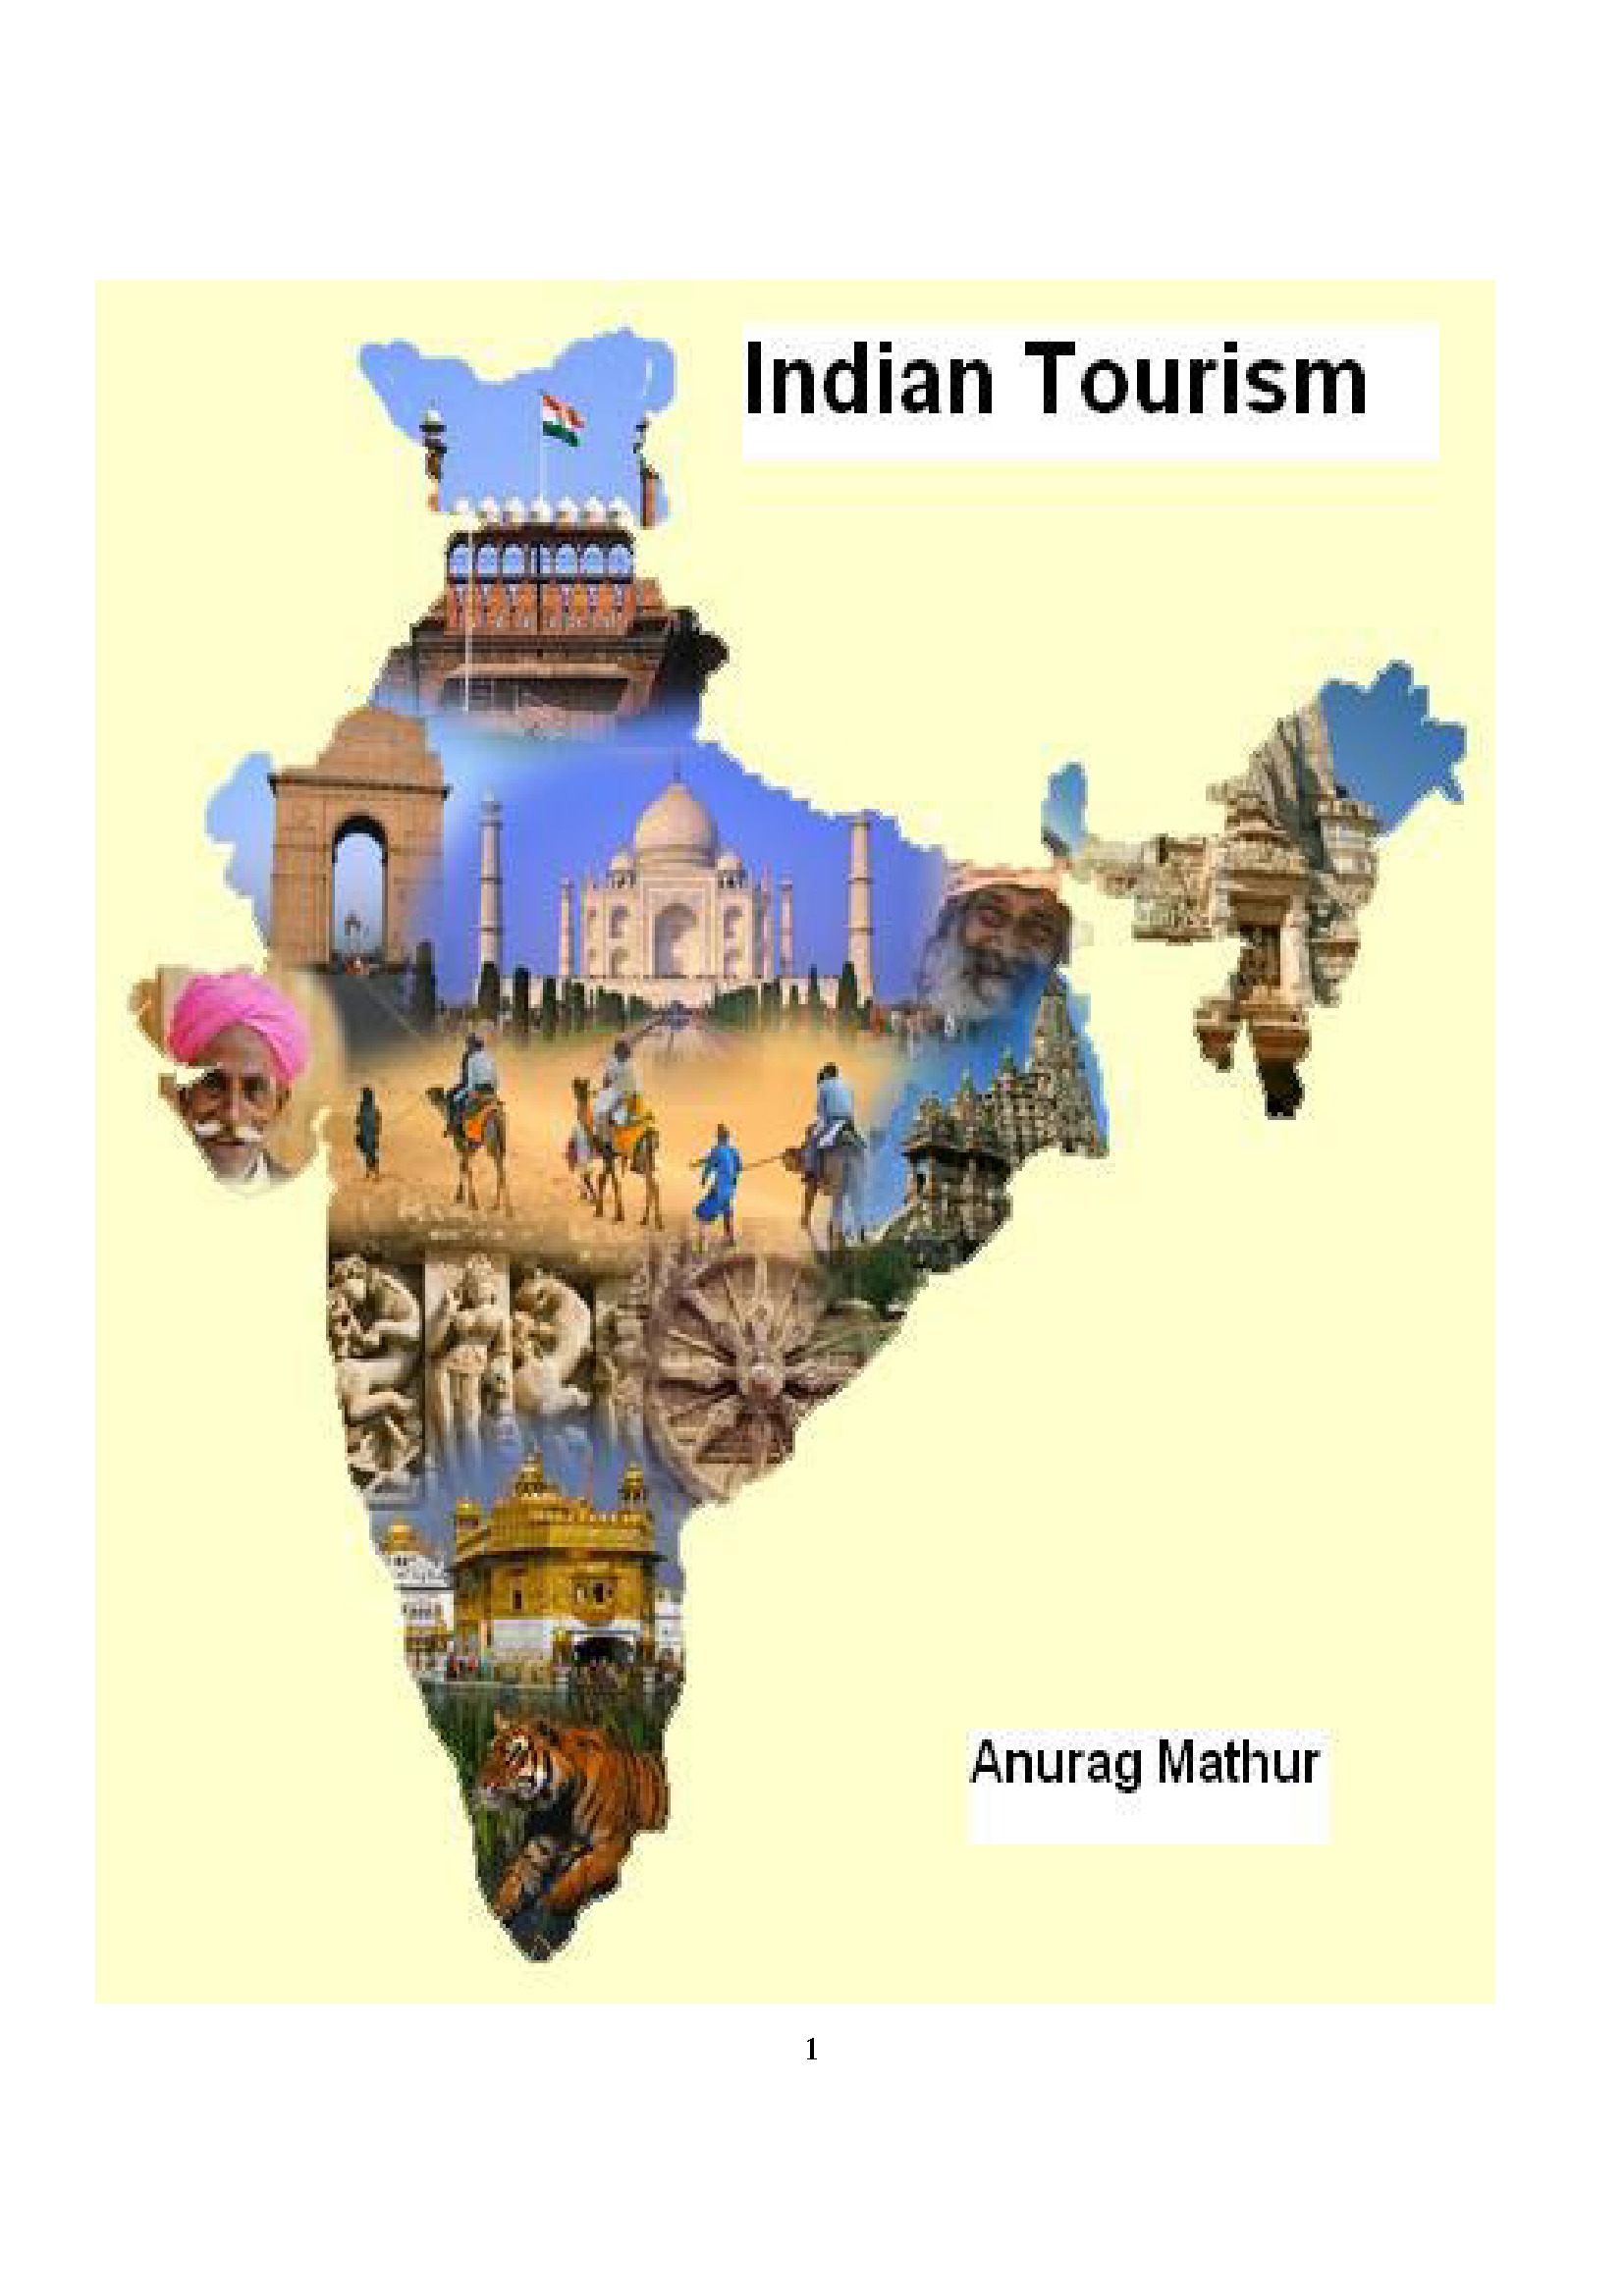 thesis on tourism in india